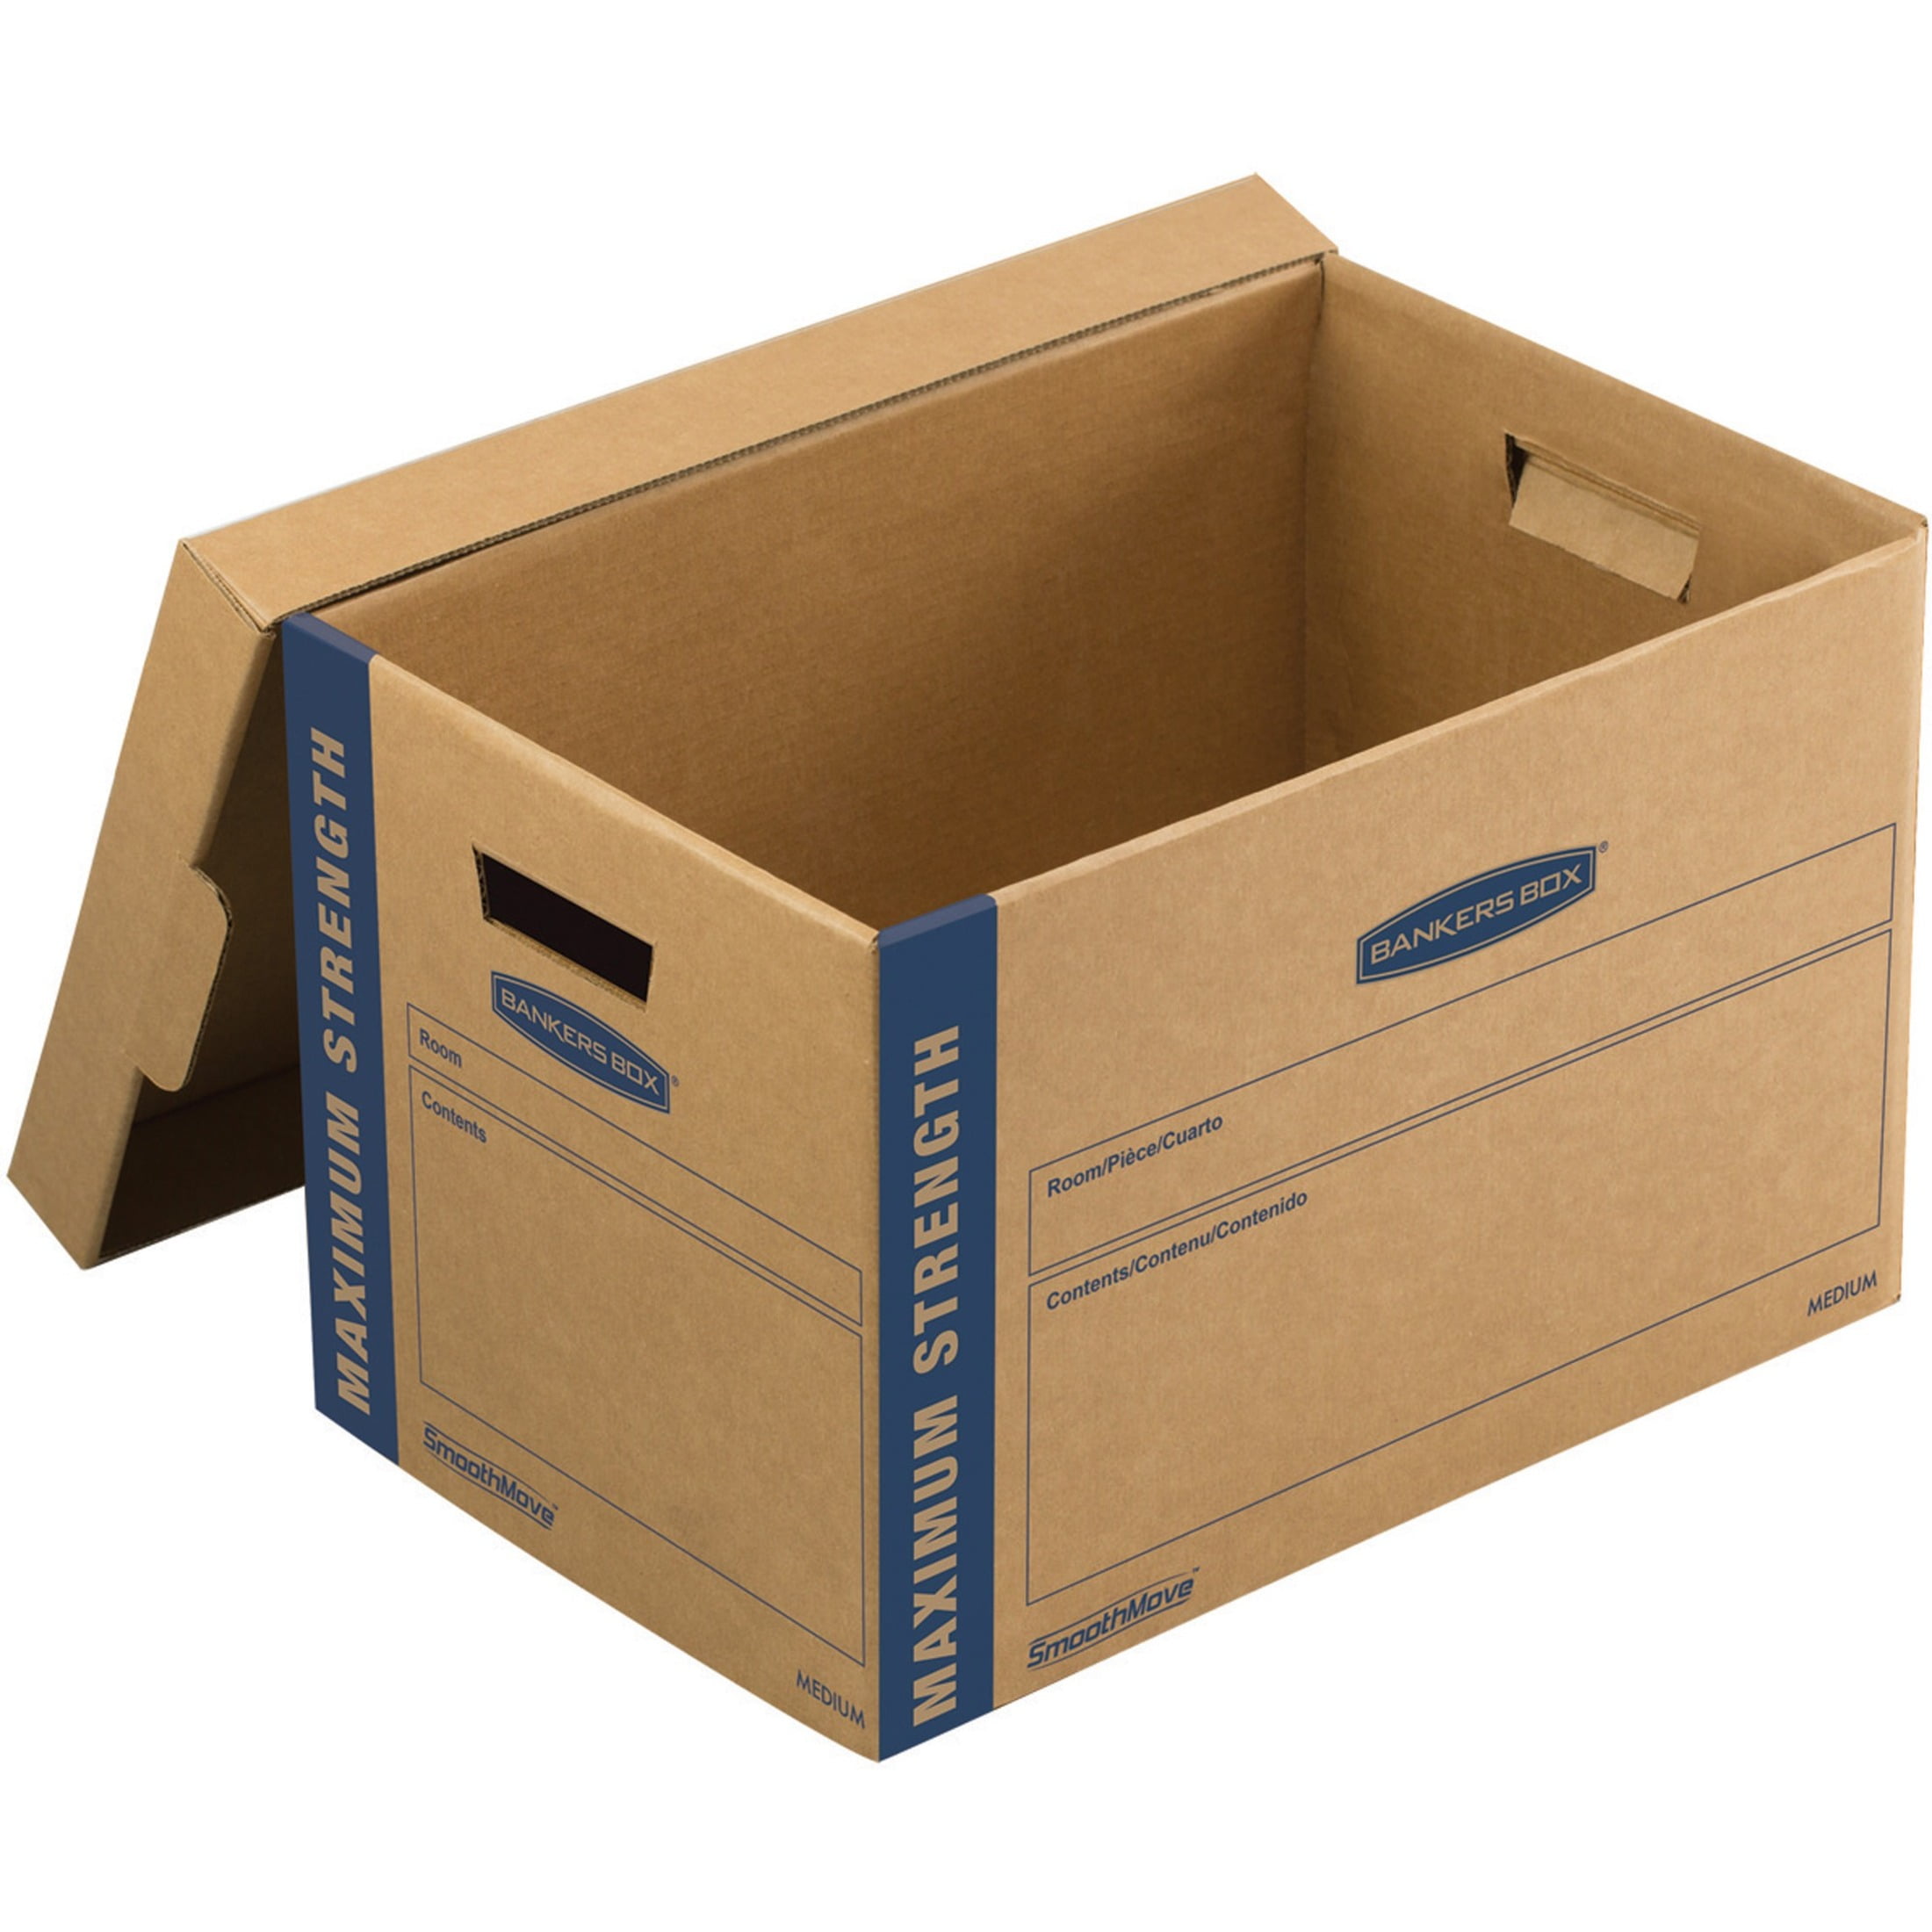 Bankers Box SmoothMove Maximum Strength Moving Boxes Small 8